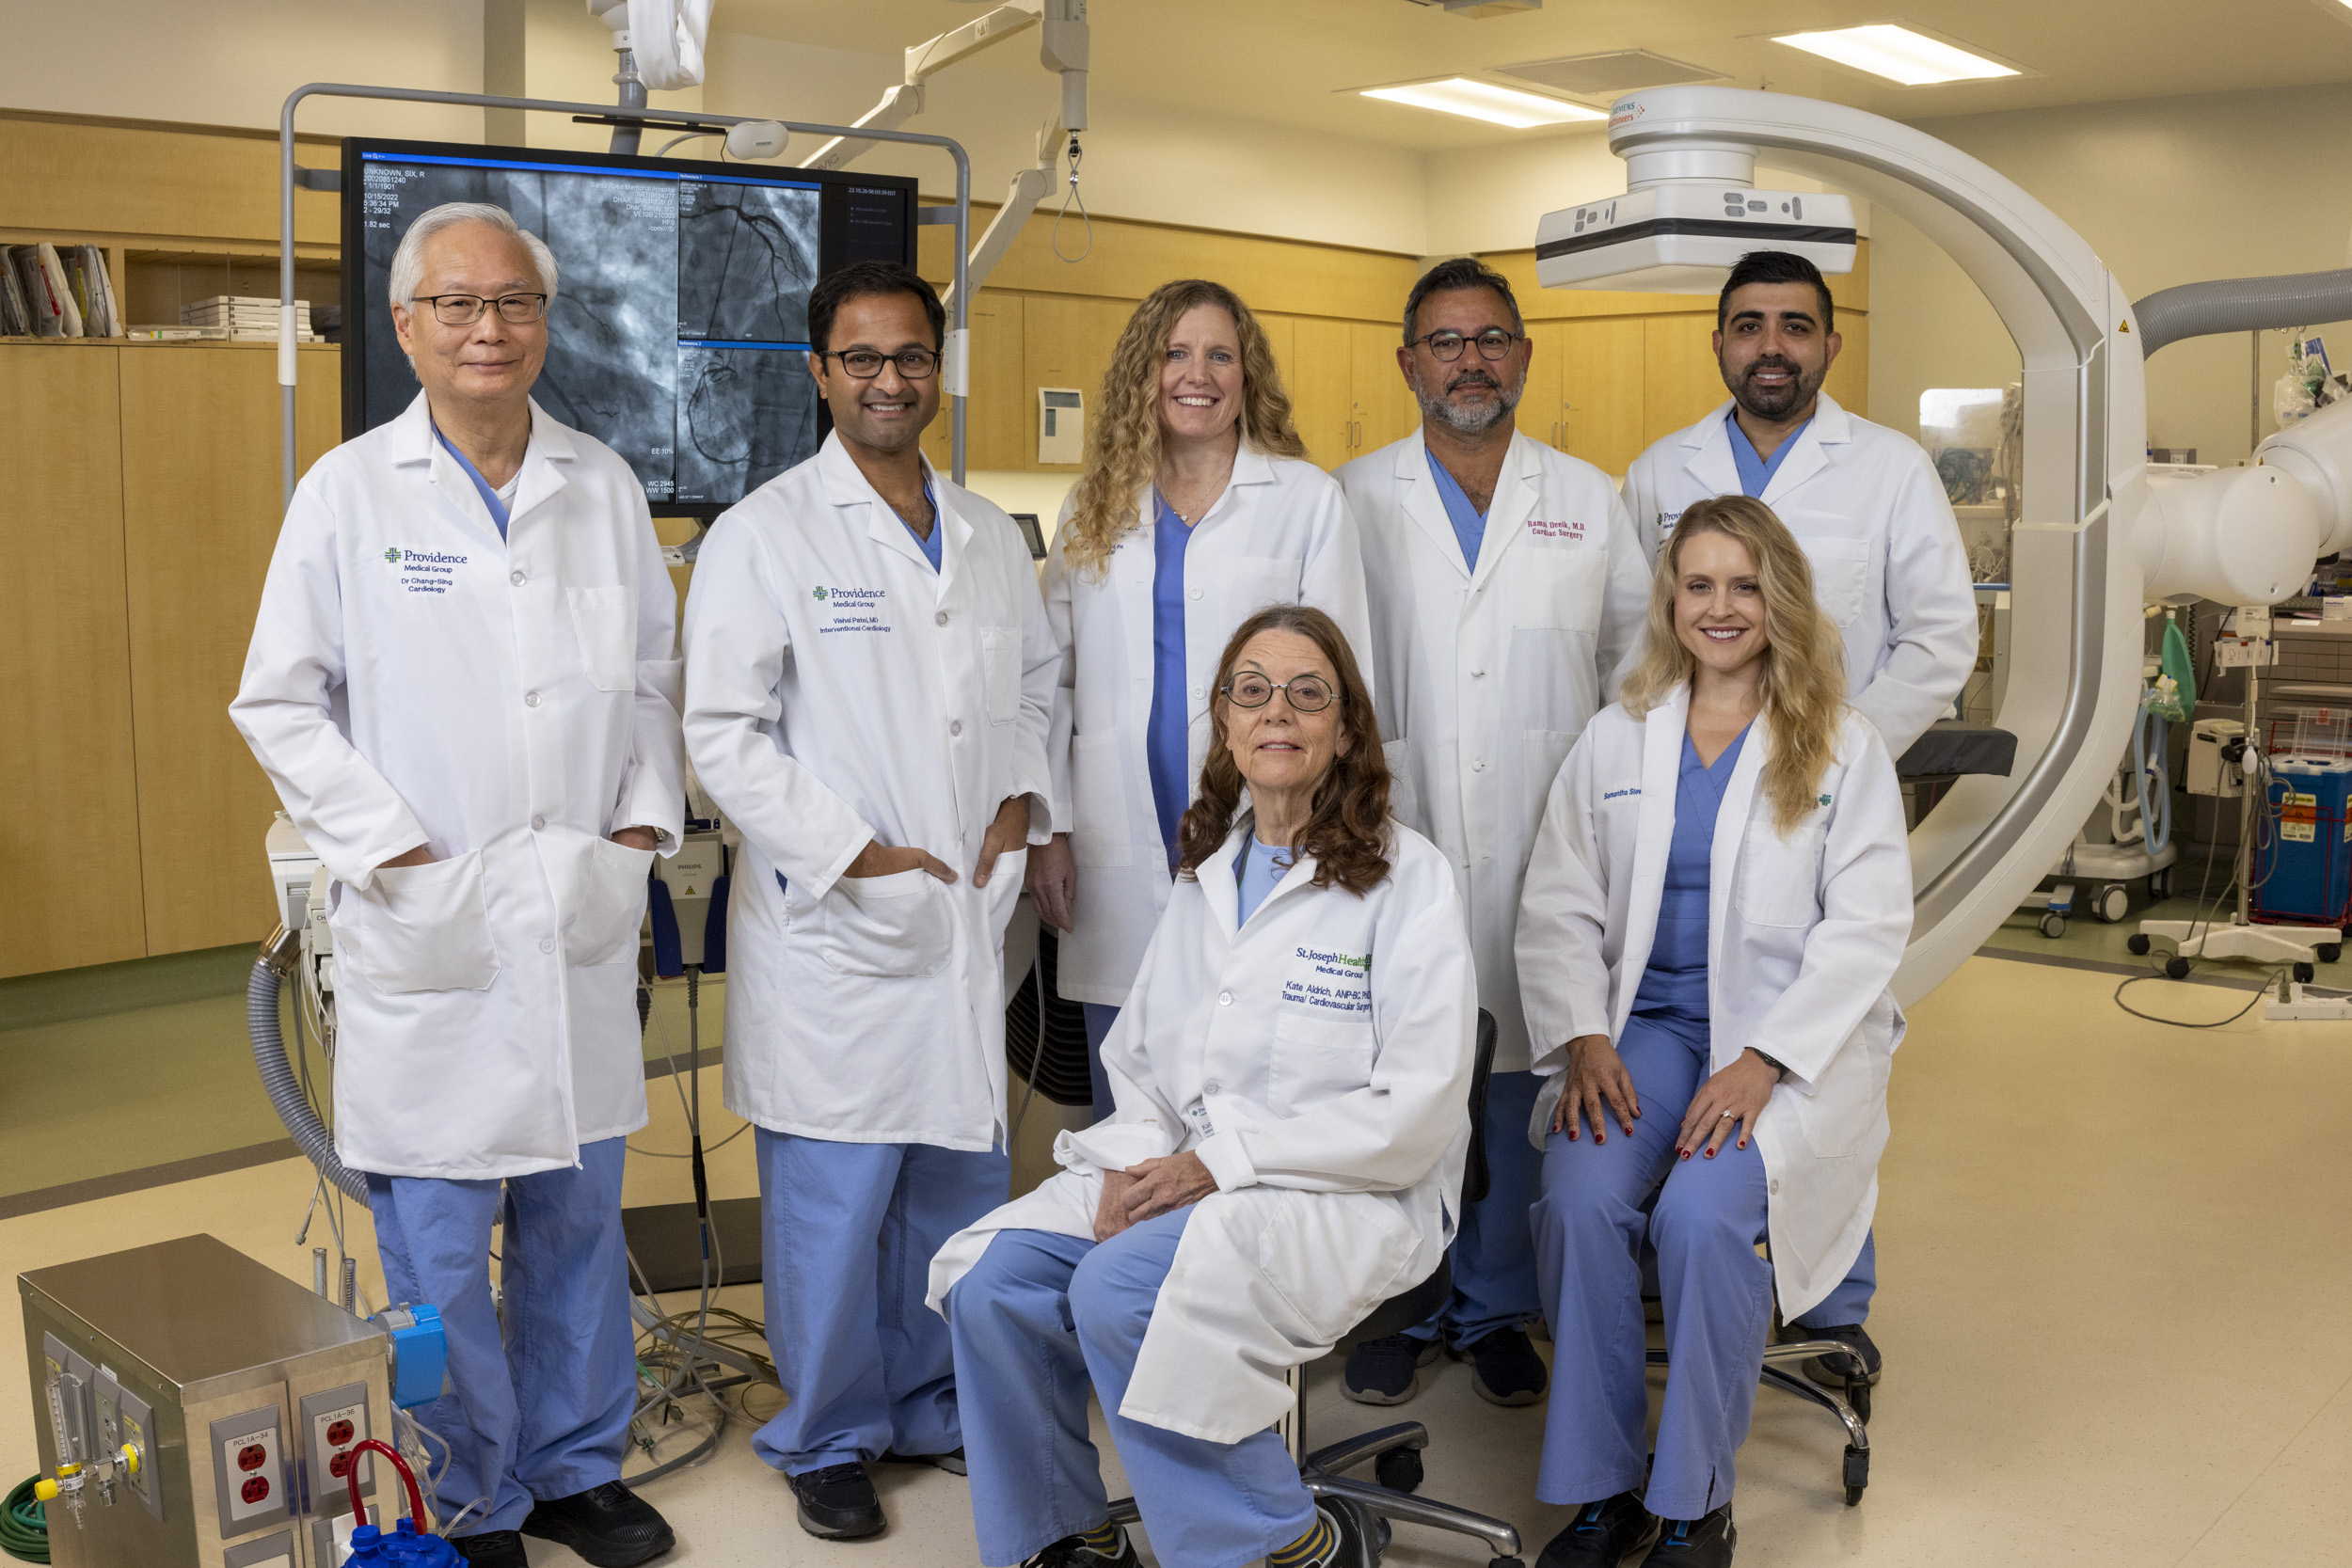 Lesley M Field, PA-C, MPH, MSPAS (top row, center) stands with the Structural Heart team at Providence Santa Rosa Memorial Hospital